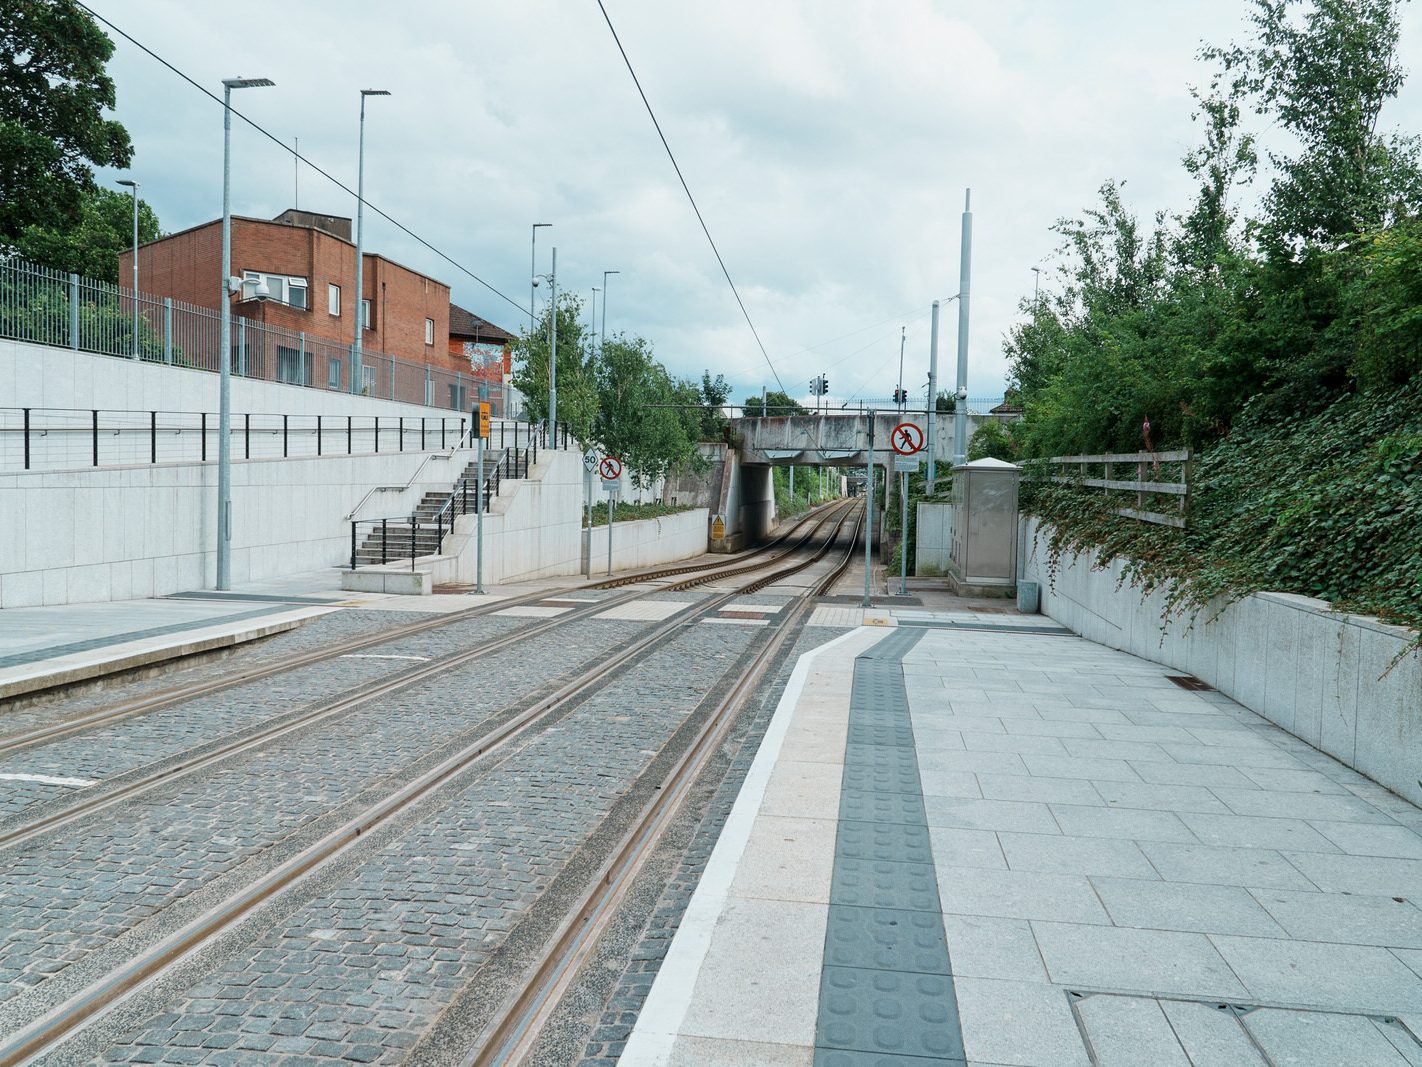 CABRA LUAS TRAM STOP ON CONNAUGHT STREET [GOOGLE BARD INCORRECTLY CLAIMED THAT THERE IS A PUBLIC TOILET AND A TICKET OFFICE] 004